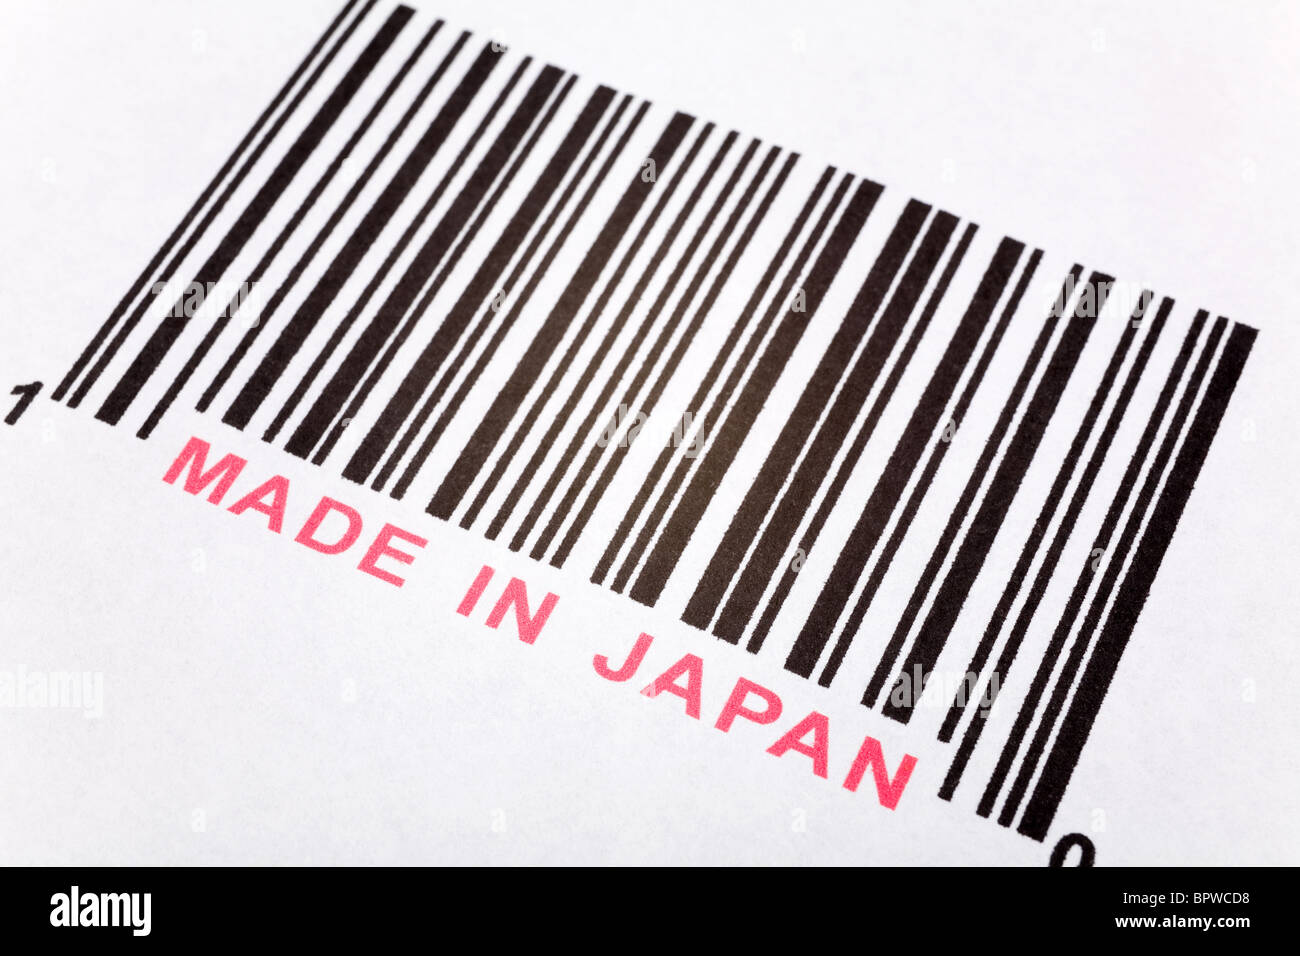 Made in Japan and barcode, business concept Stock Photo